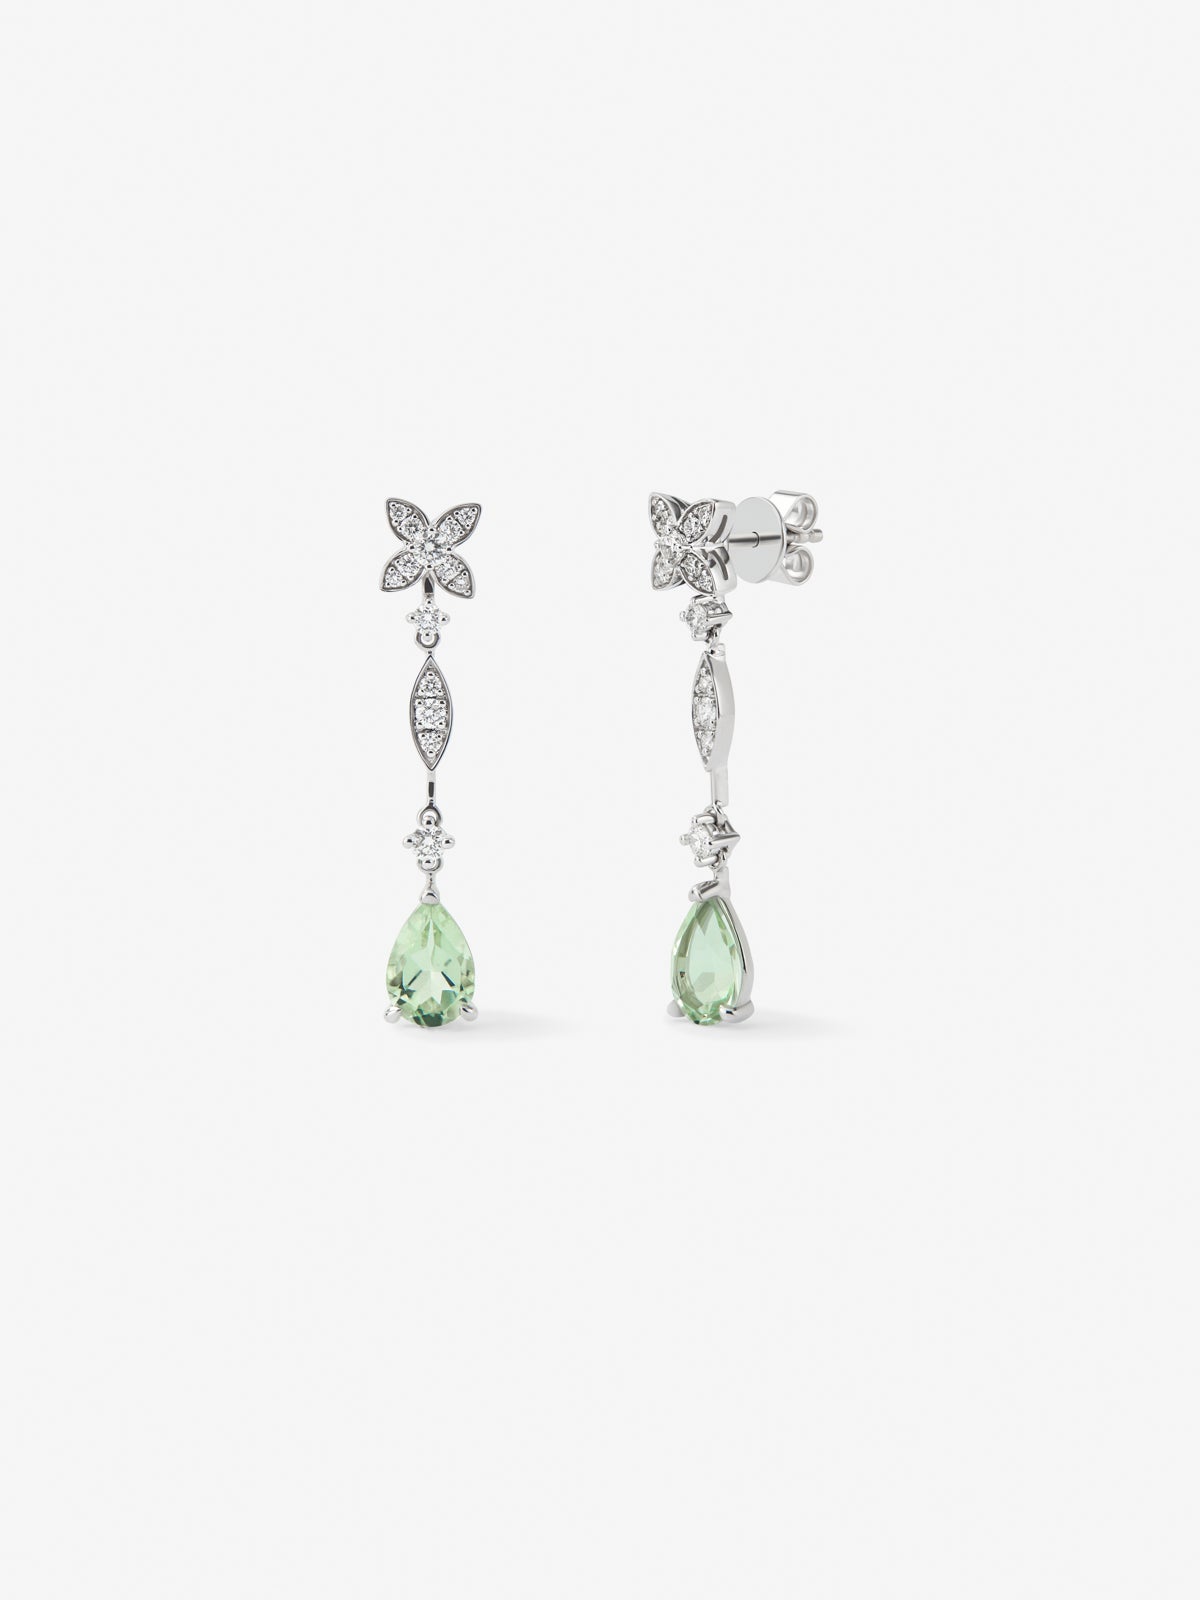 18K white gold earrings with 30 brilliant-cut diamonds with a total of 0.63 cts and 2 pear-cut green amethysts